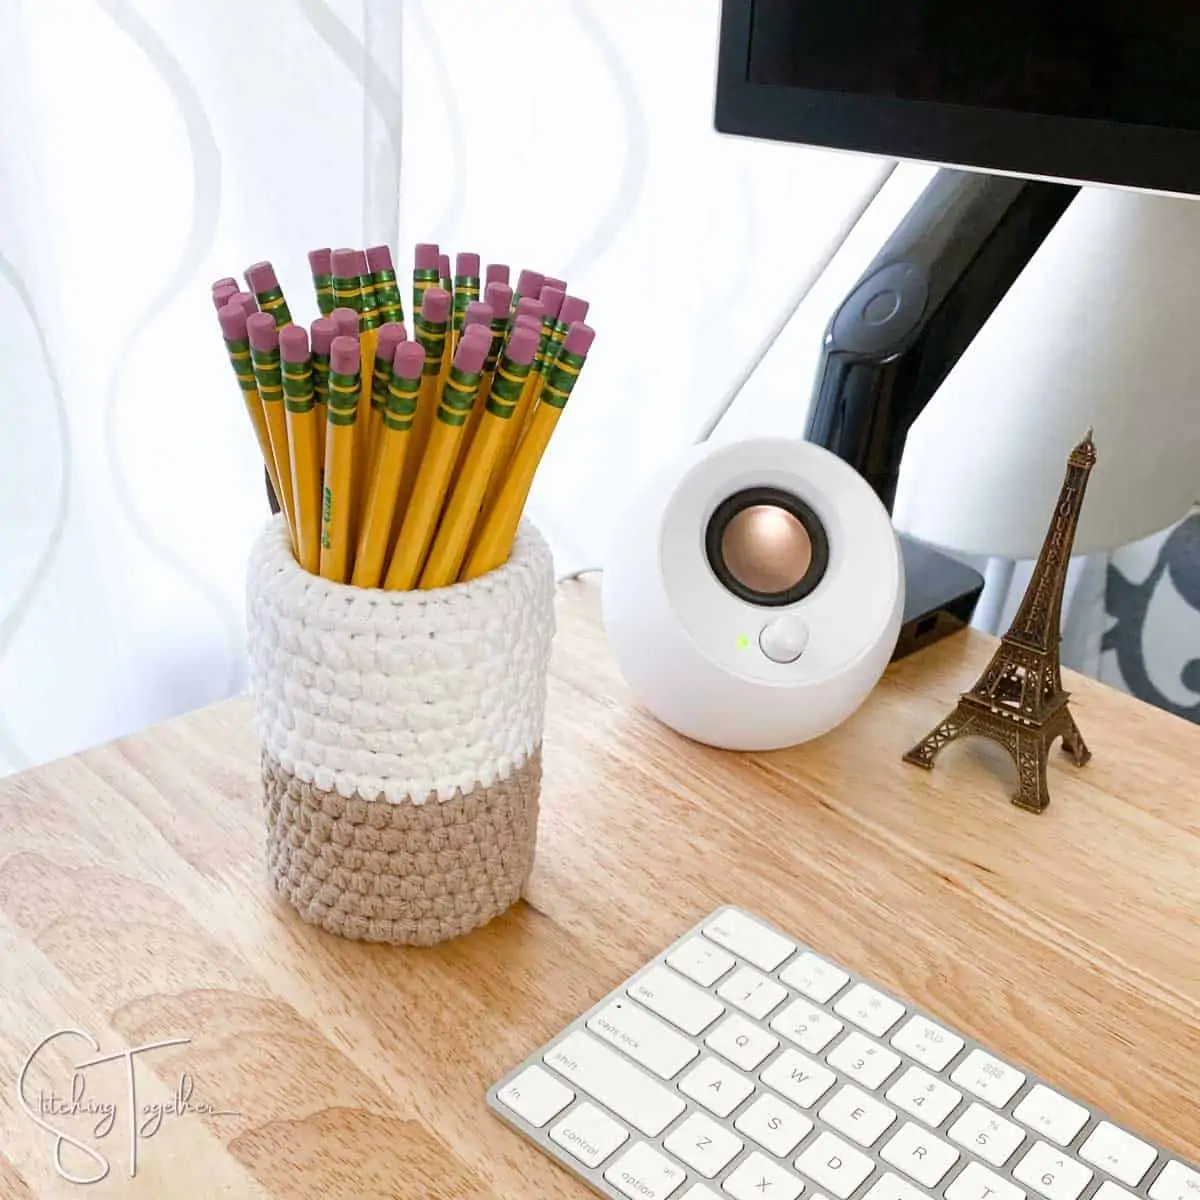 crochet pencil holder filled with pencils and sitting on a desk